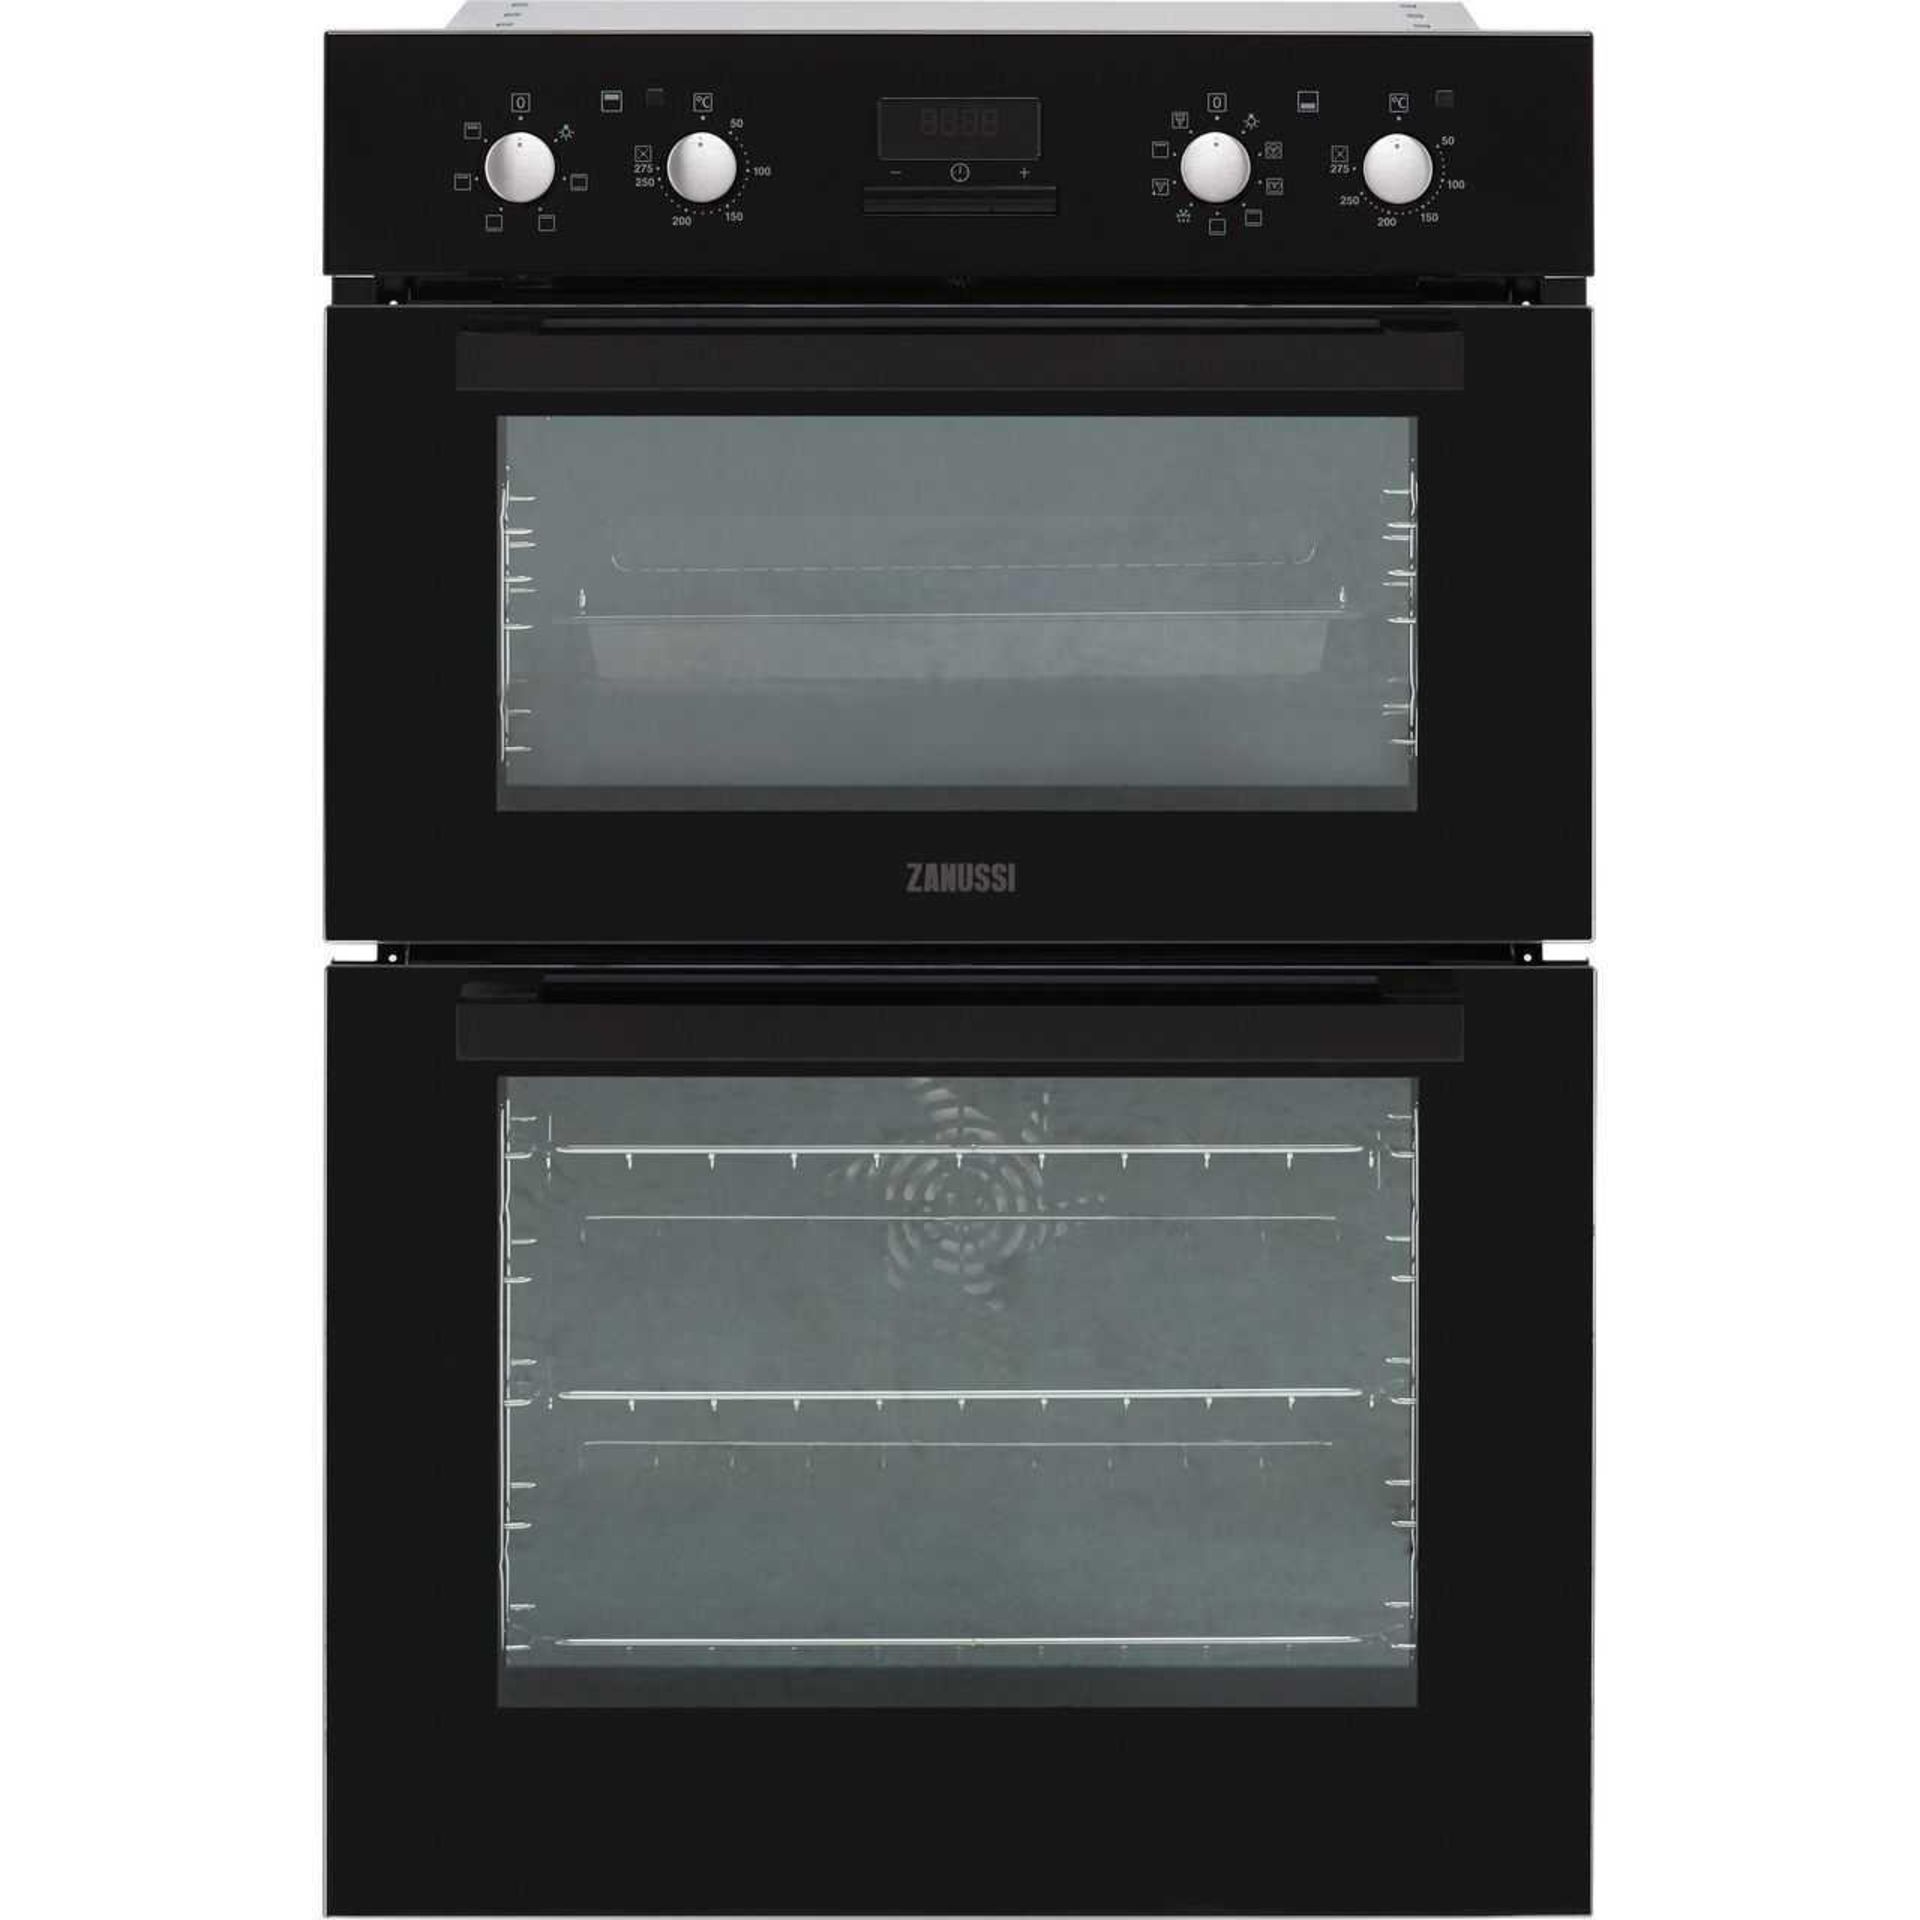 (Dd) RRP £600 Lot To Contain 1 Zanussi Electric Built In Double Oven With Catalytic Liners - Black